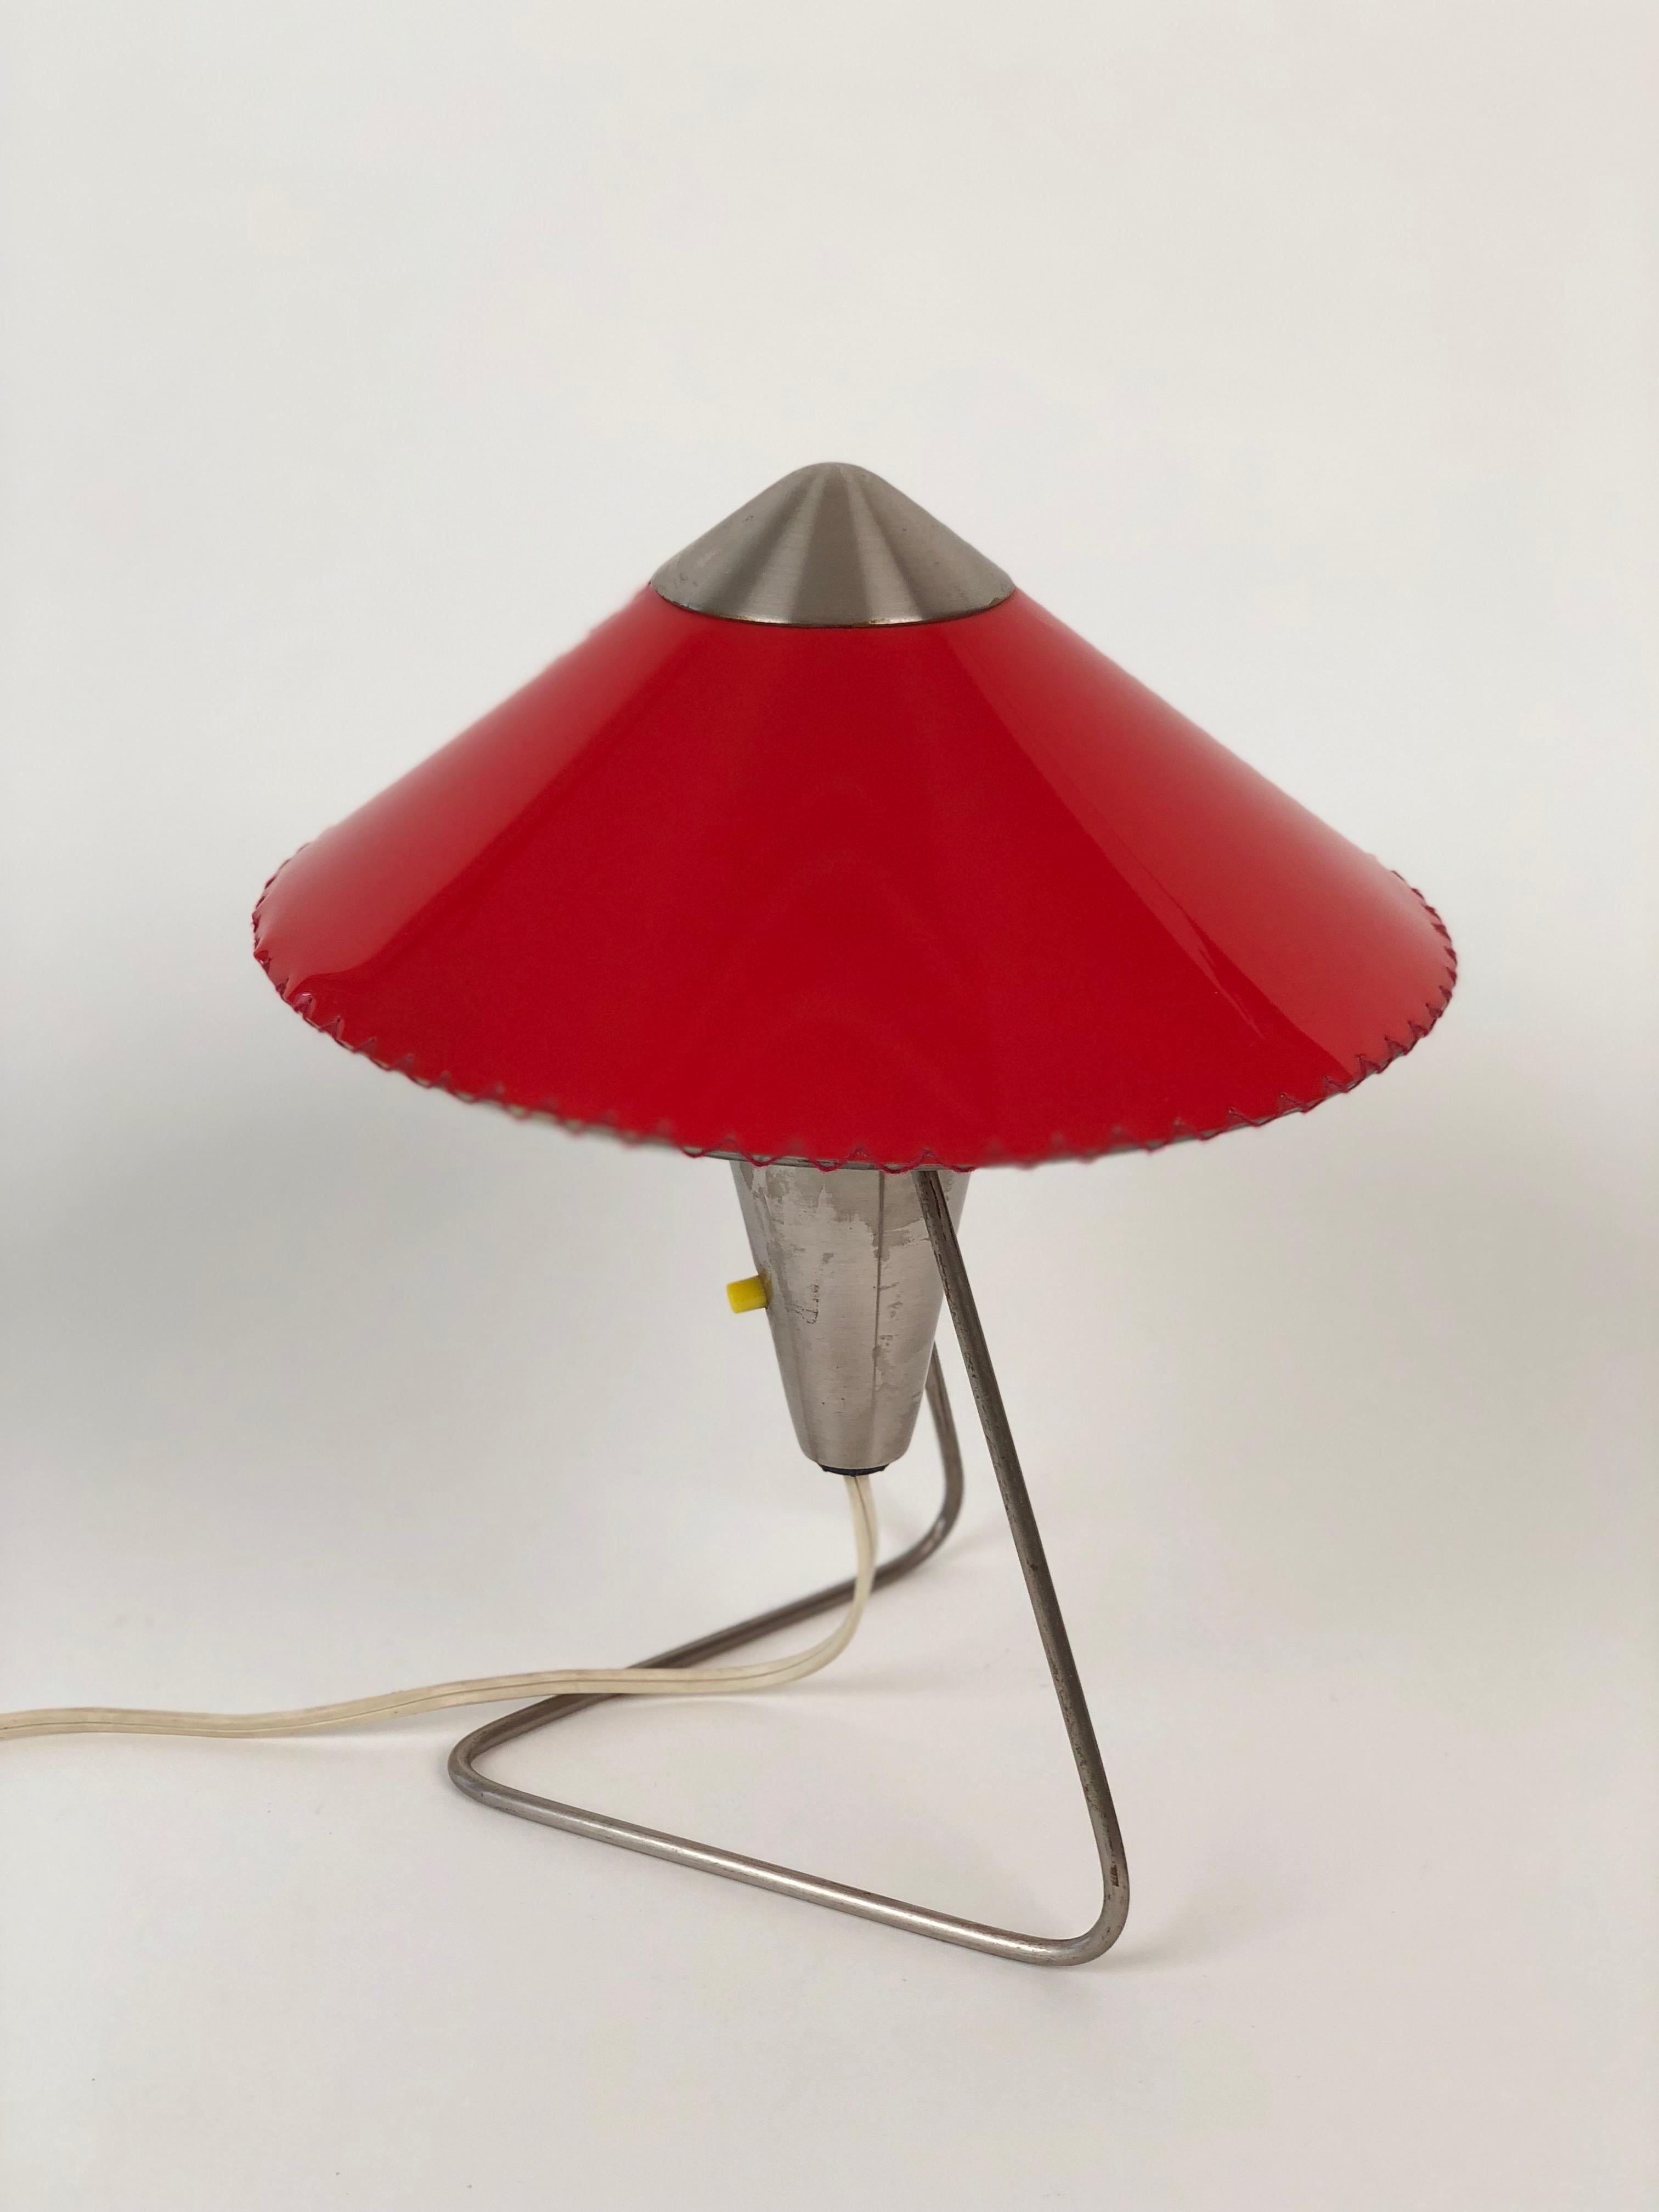 Czech Modernist Desk Lamp by Helena Frantova, 1953 In Good Condition For Sale In Vienna, Austria